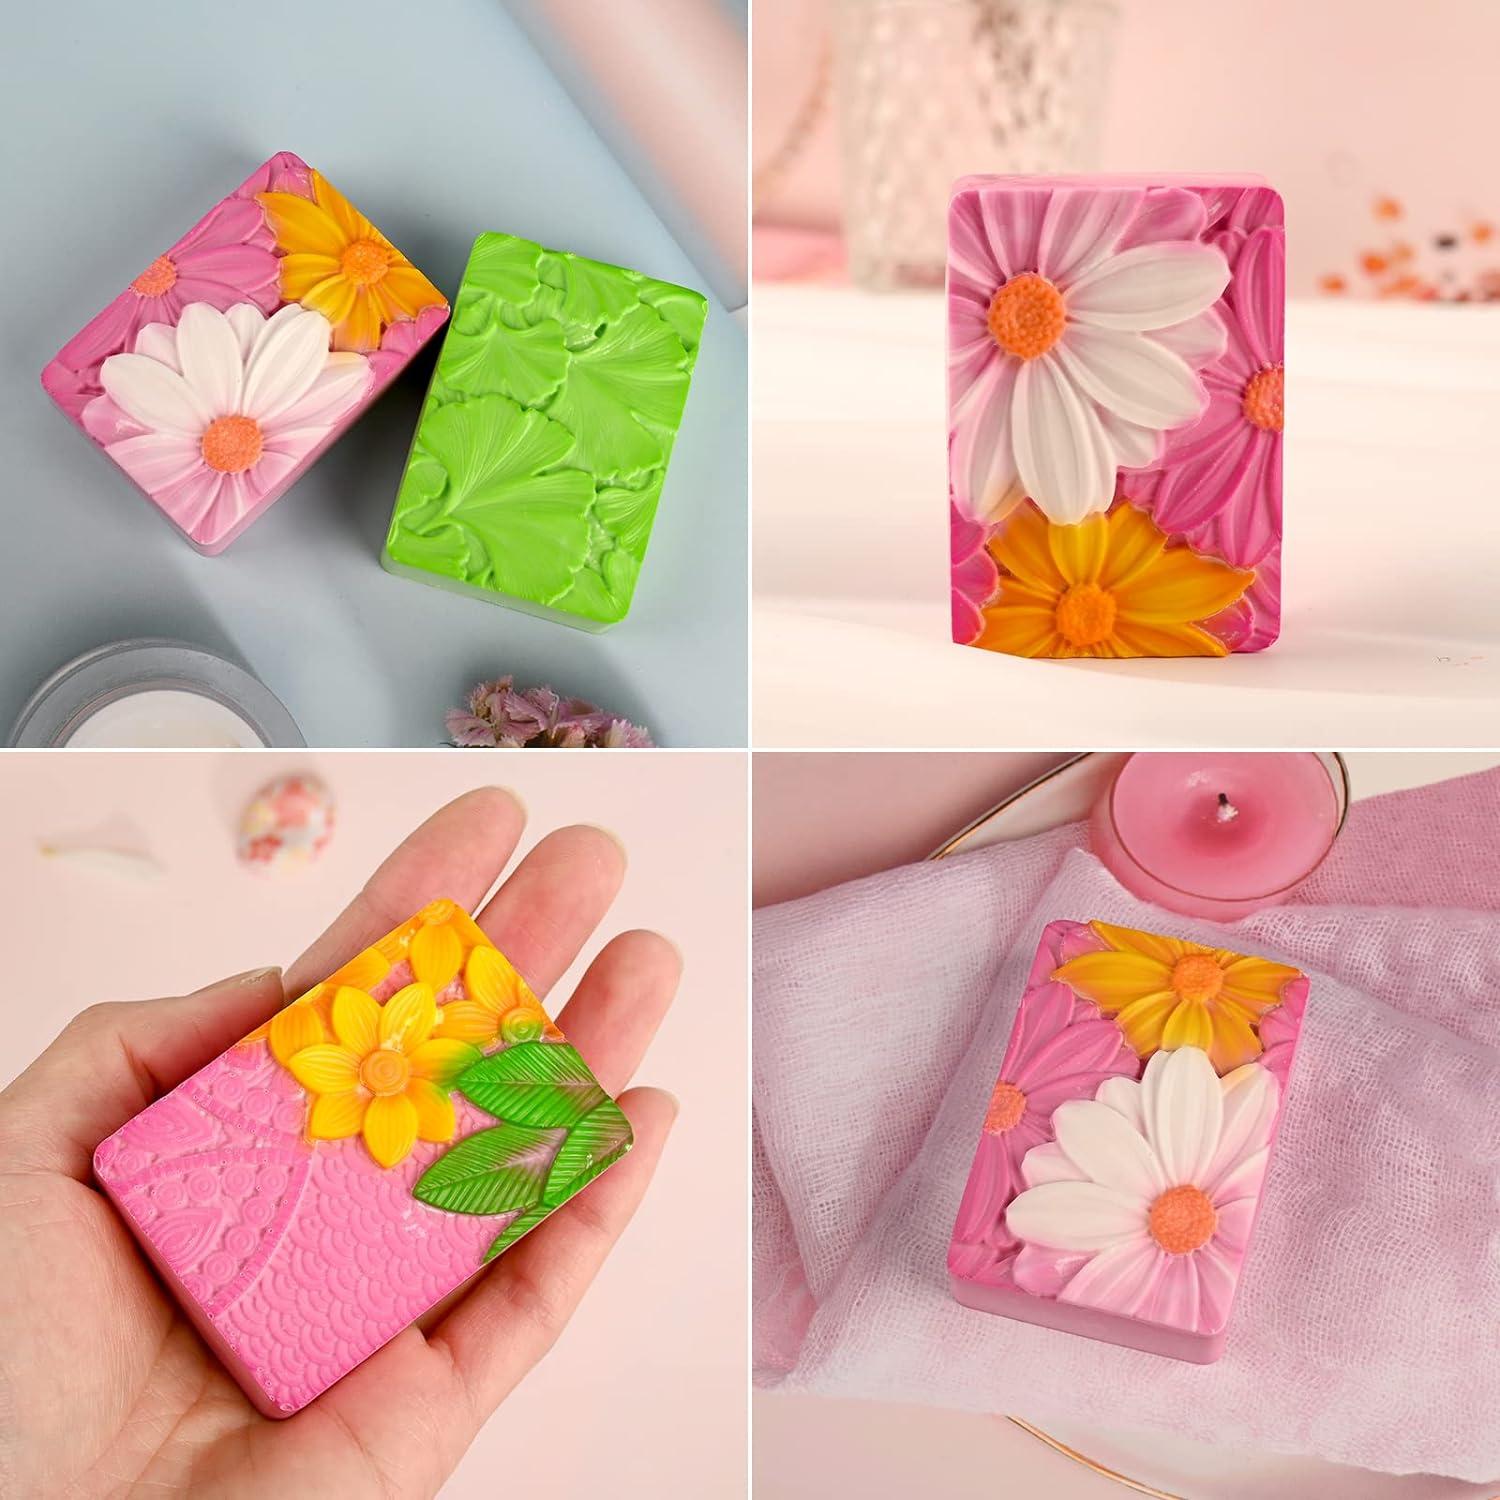 Flower Silicone Soap Mold Homemade Soap DIY Craft Soap Making